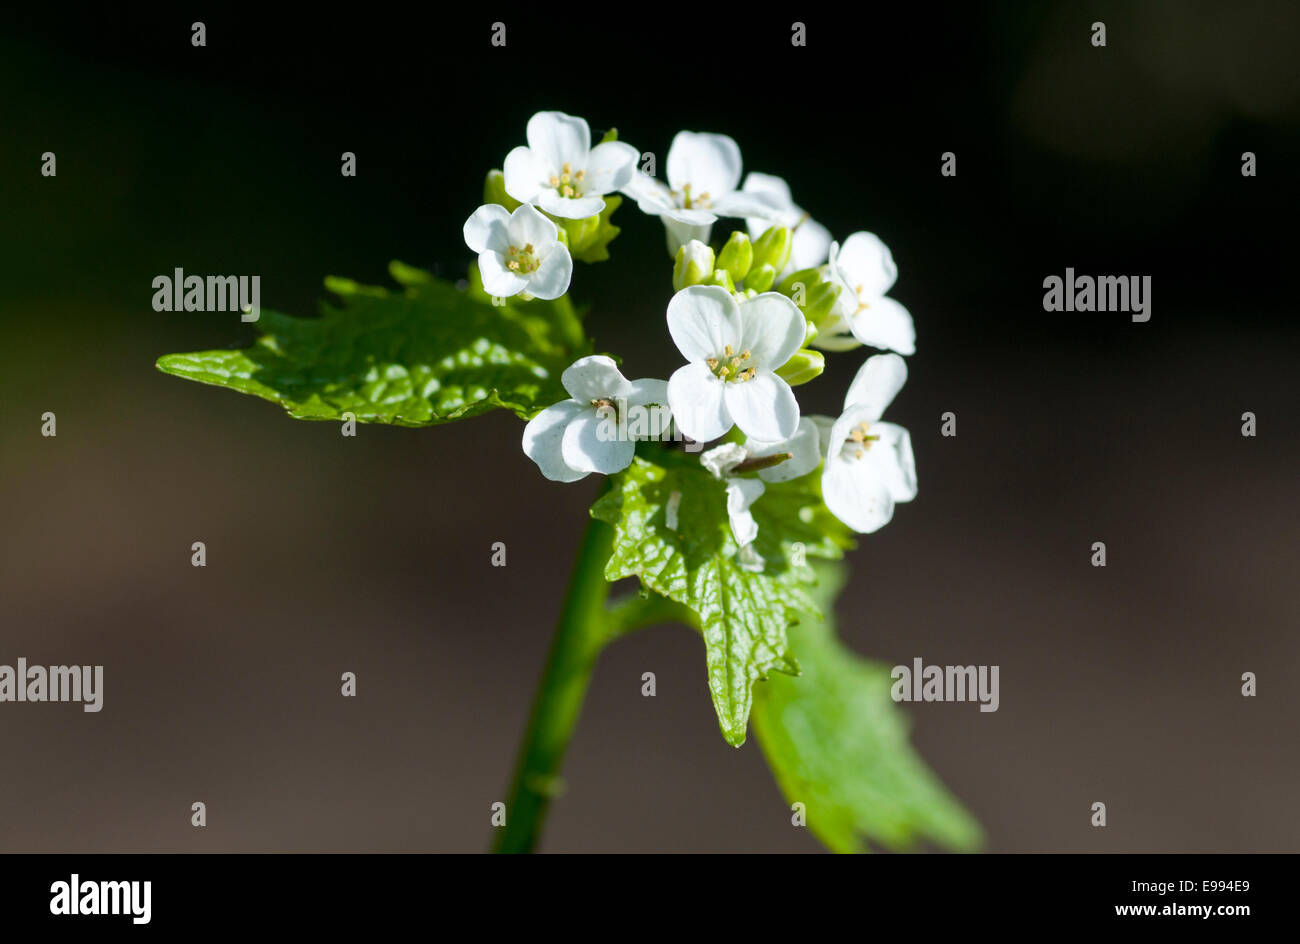 Flowers and leaves of Garlic Mustard (Alliaria petiolata) against a dark background Stock Photo